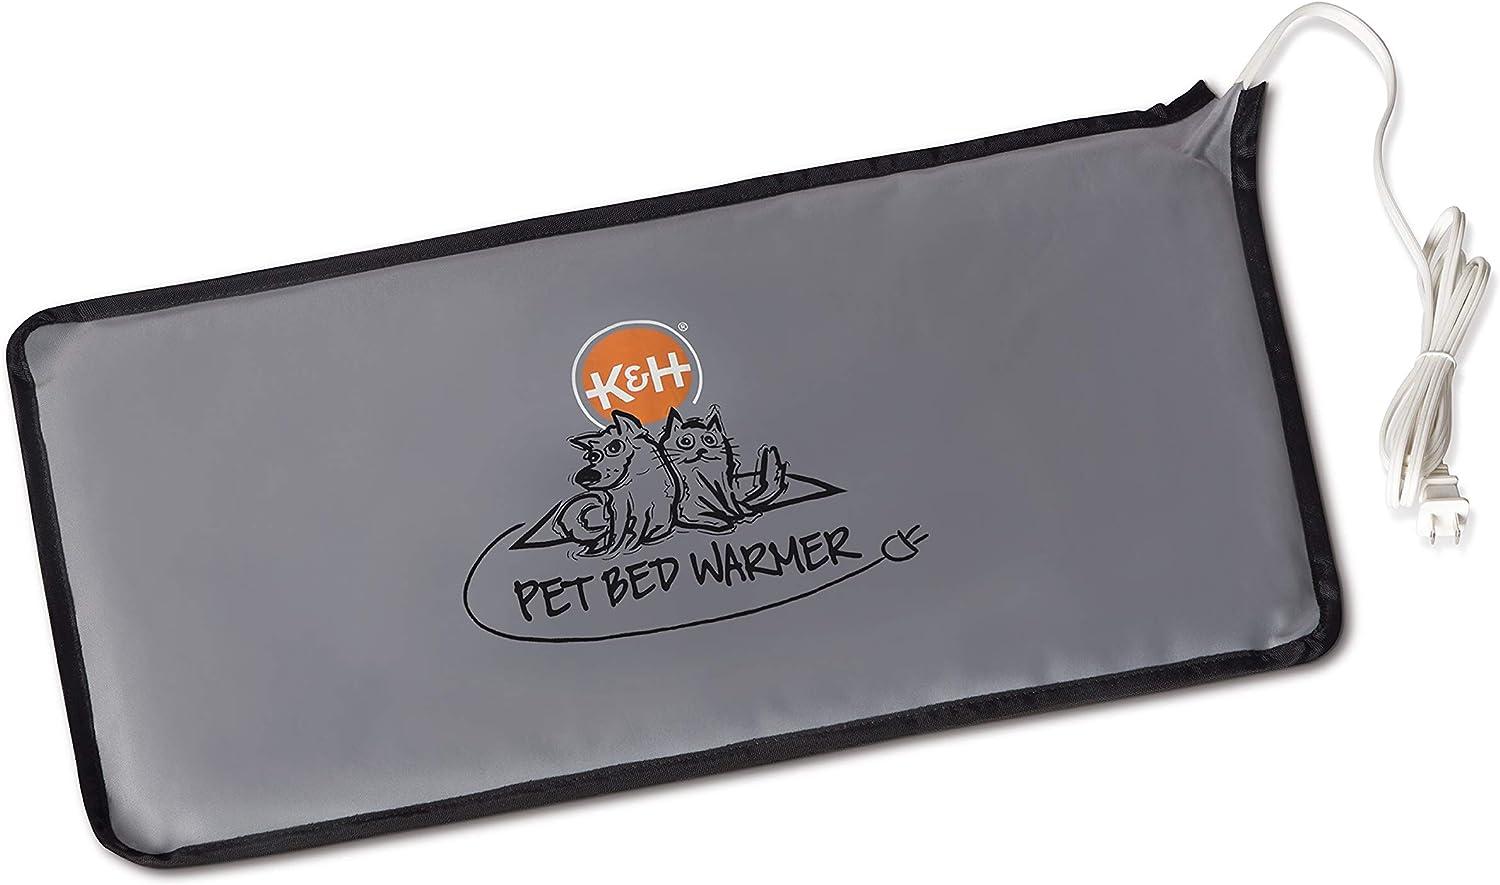 KH Pet Bed Warmer Heating Pad Insert for $19.99